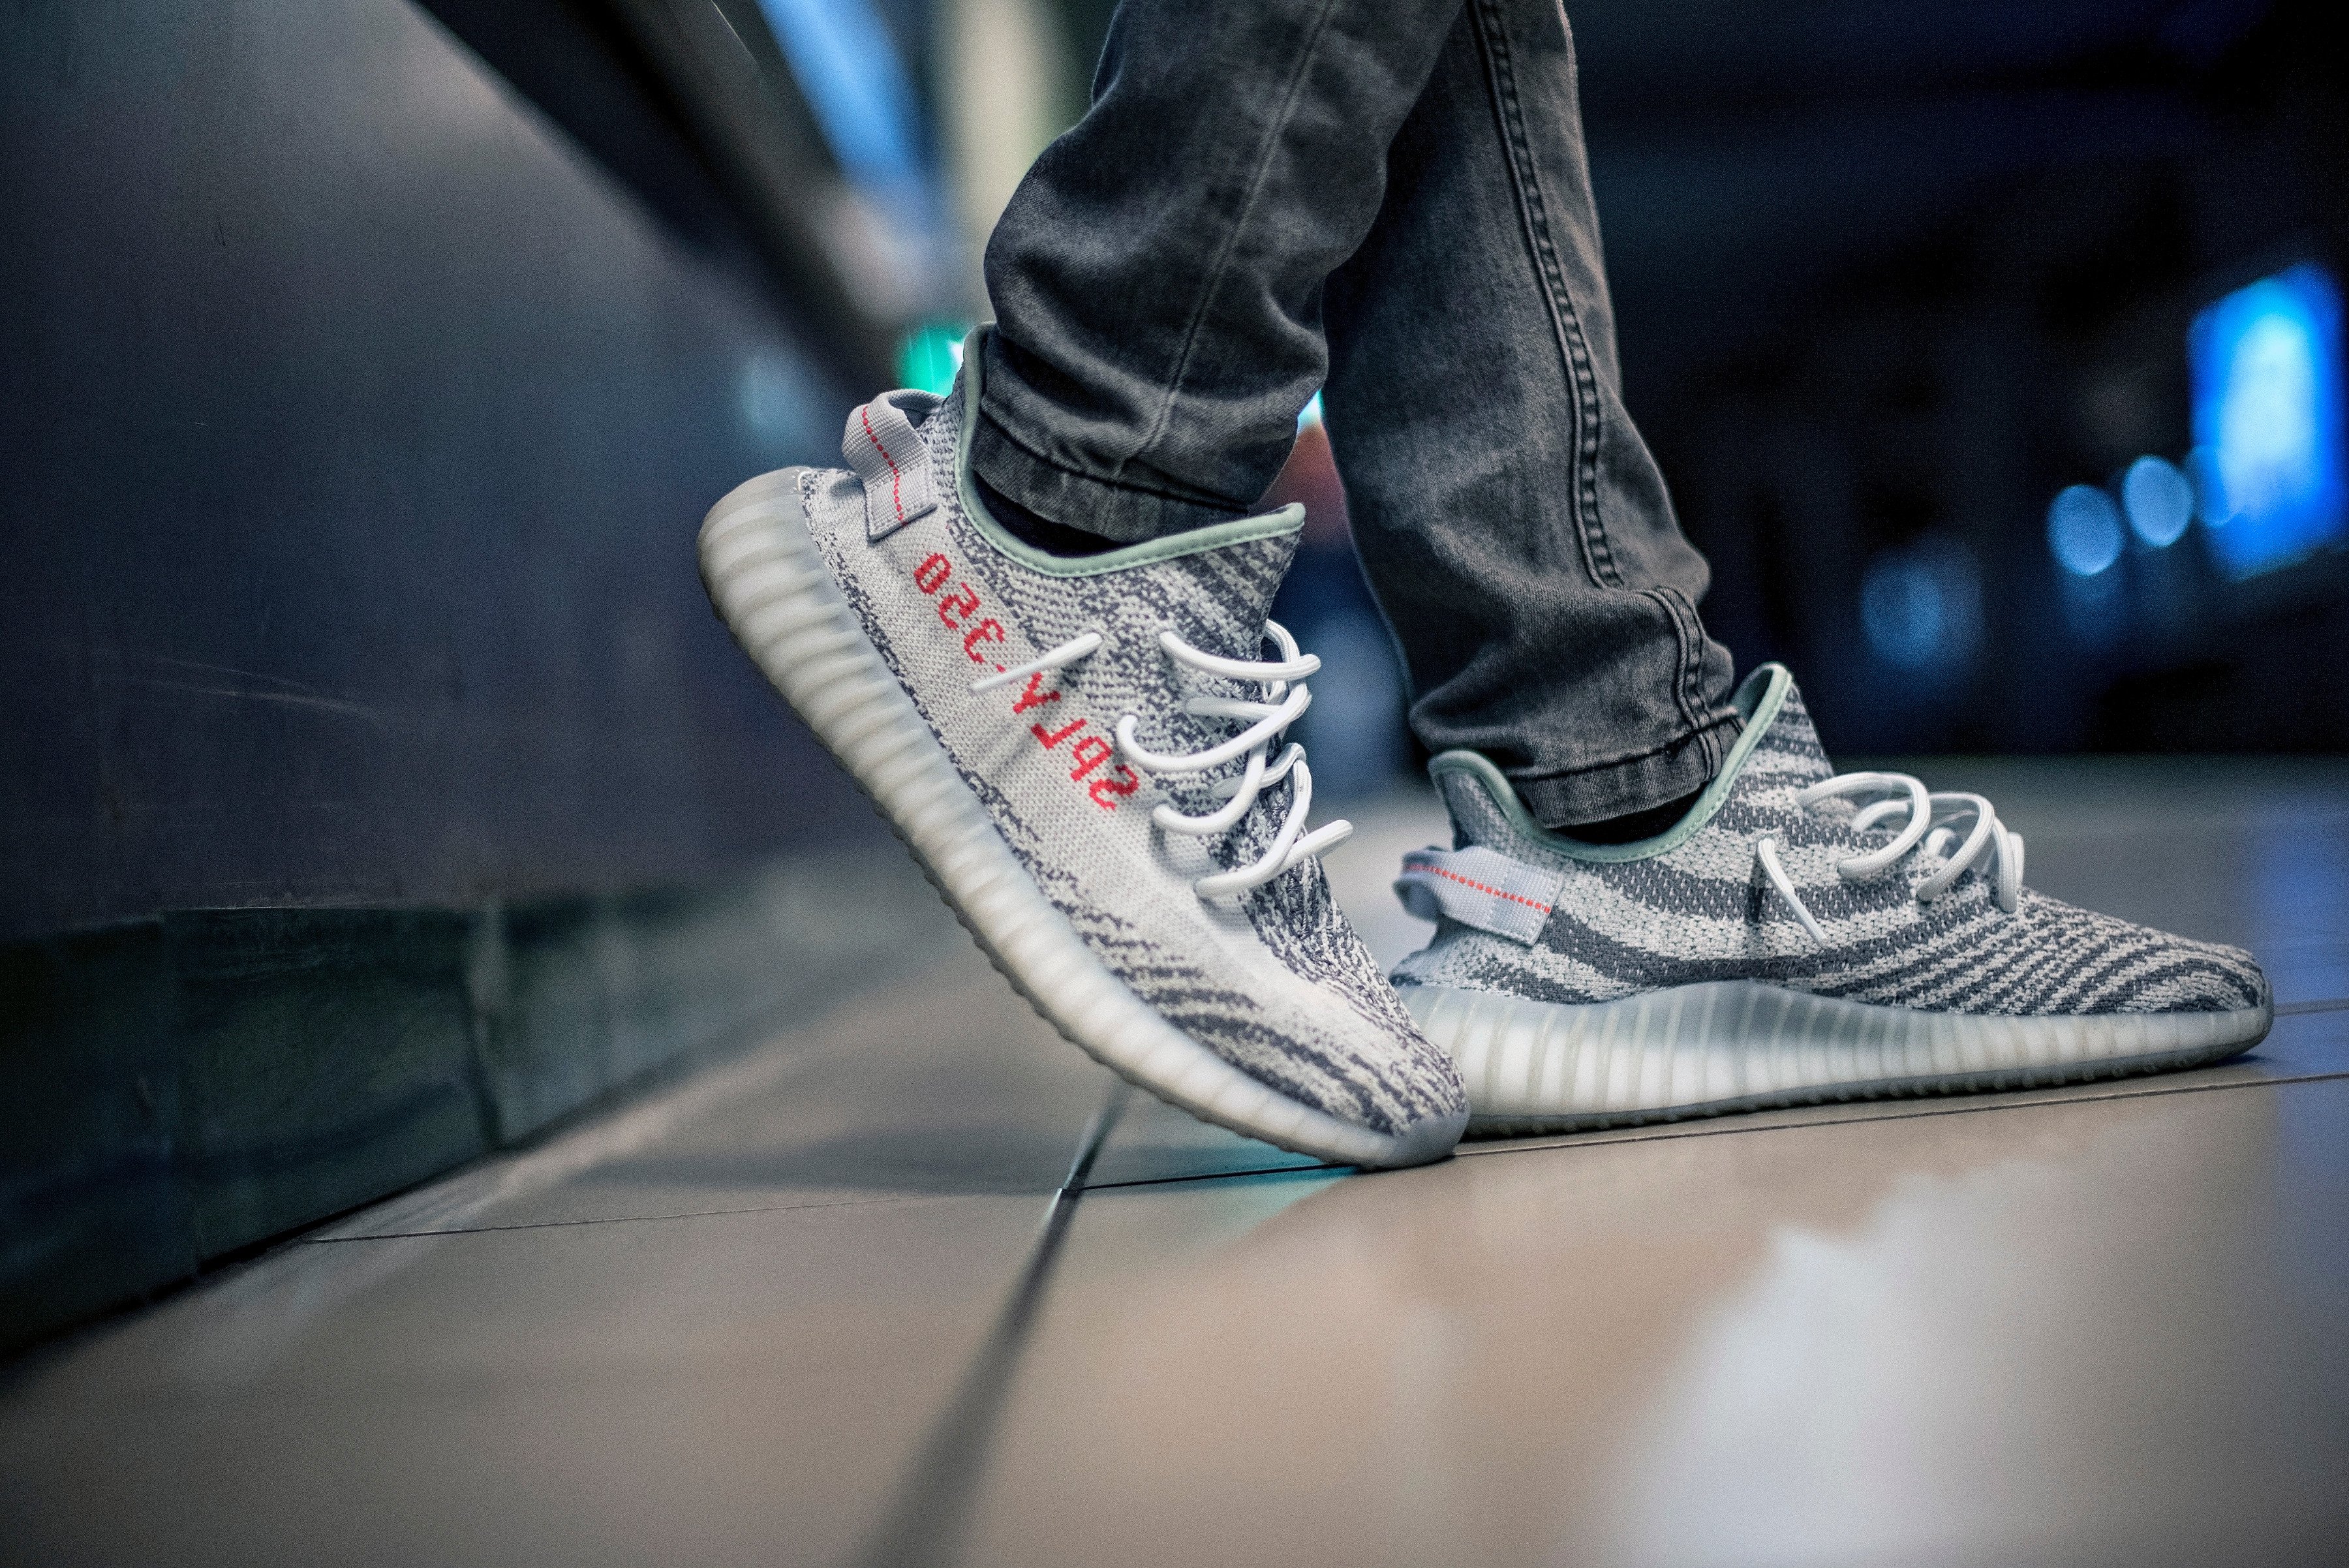 The fate of excess Yeezy stock, after splitting from Ye, aka Kanye West: rather than 'burn' it, CEO Bjørn Gulden plans to sell the sneakers and donate the proceeds to charity